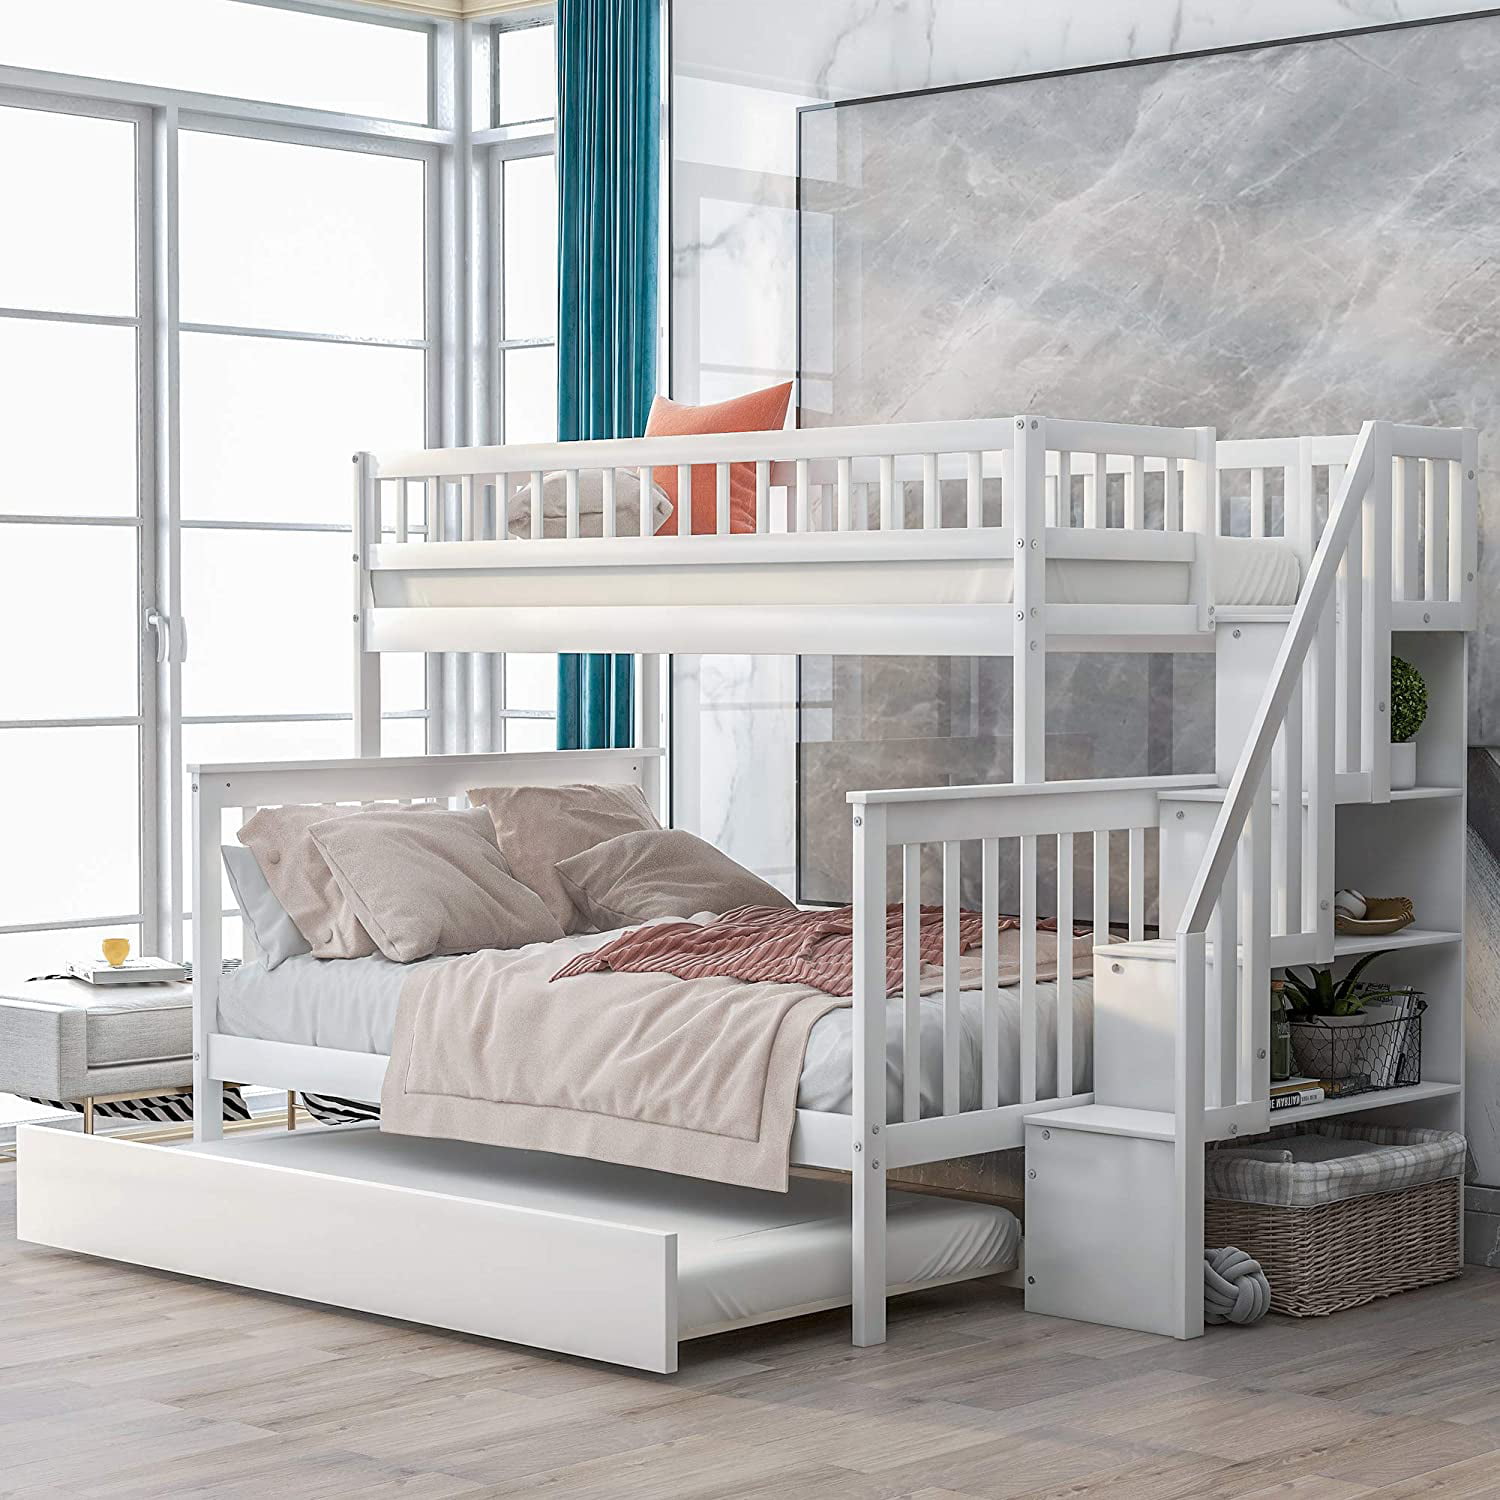 Full Bunk Bed With Trundle Limited Time, Full Bunk Bed With Trundle